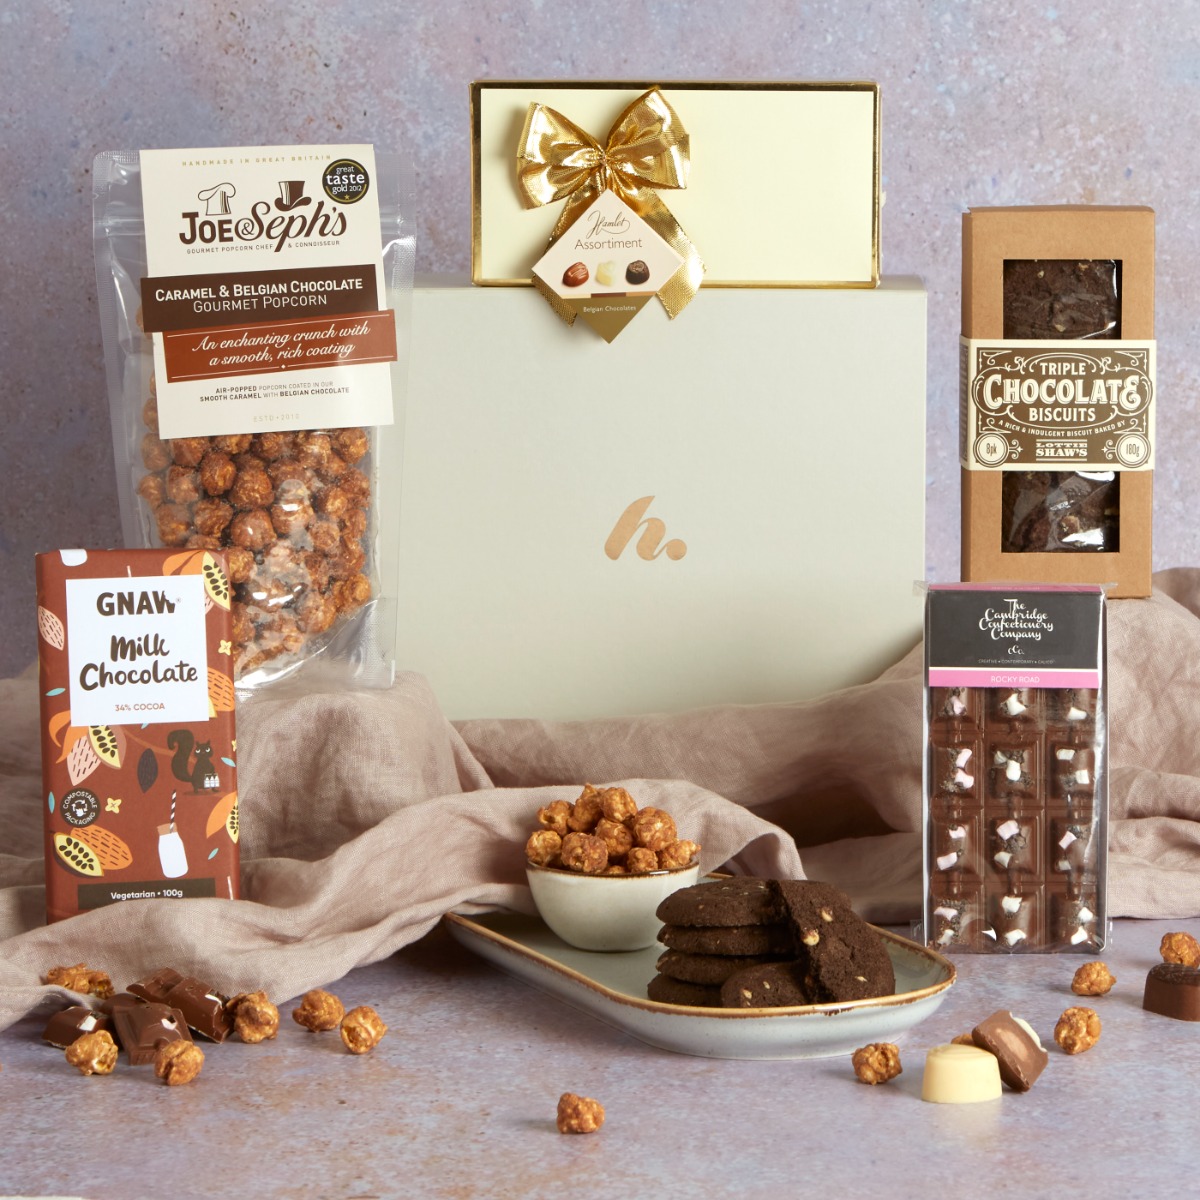 Heavenly Chocolate Hamper with contents on display